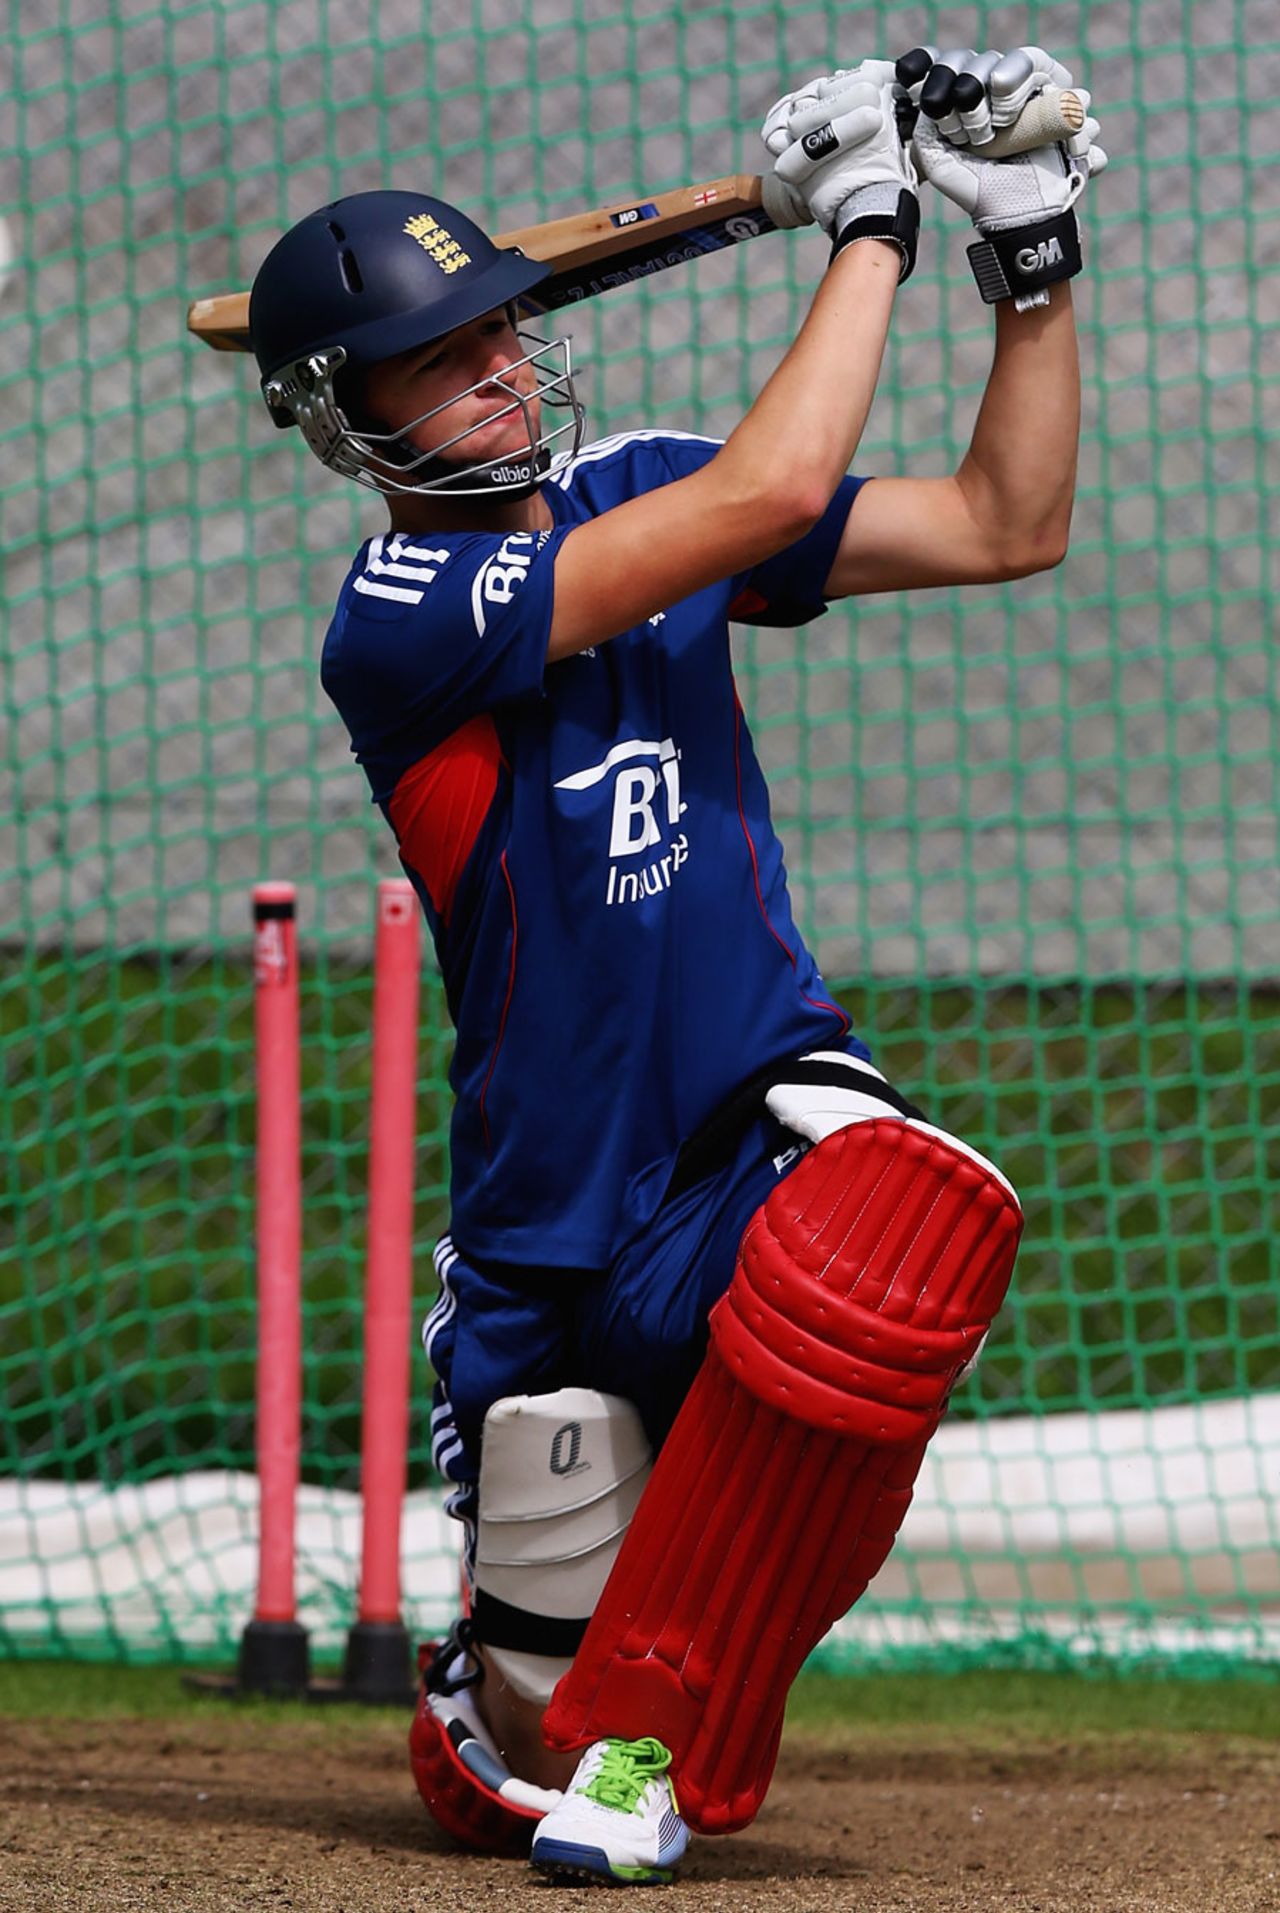 Matthew Fisher bats in the nets, National Cricket Performance Centre, Loughborough, August 5, 2013